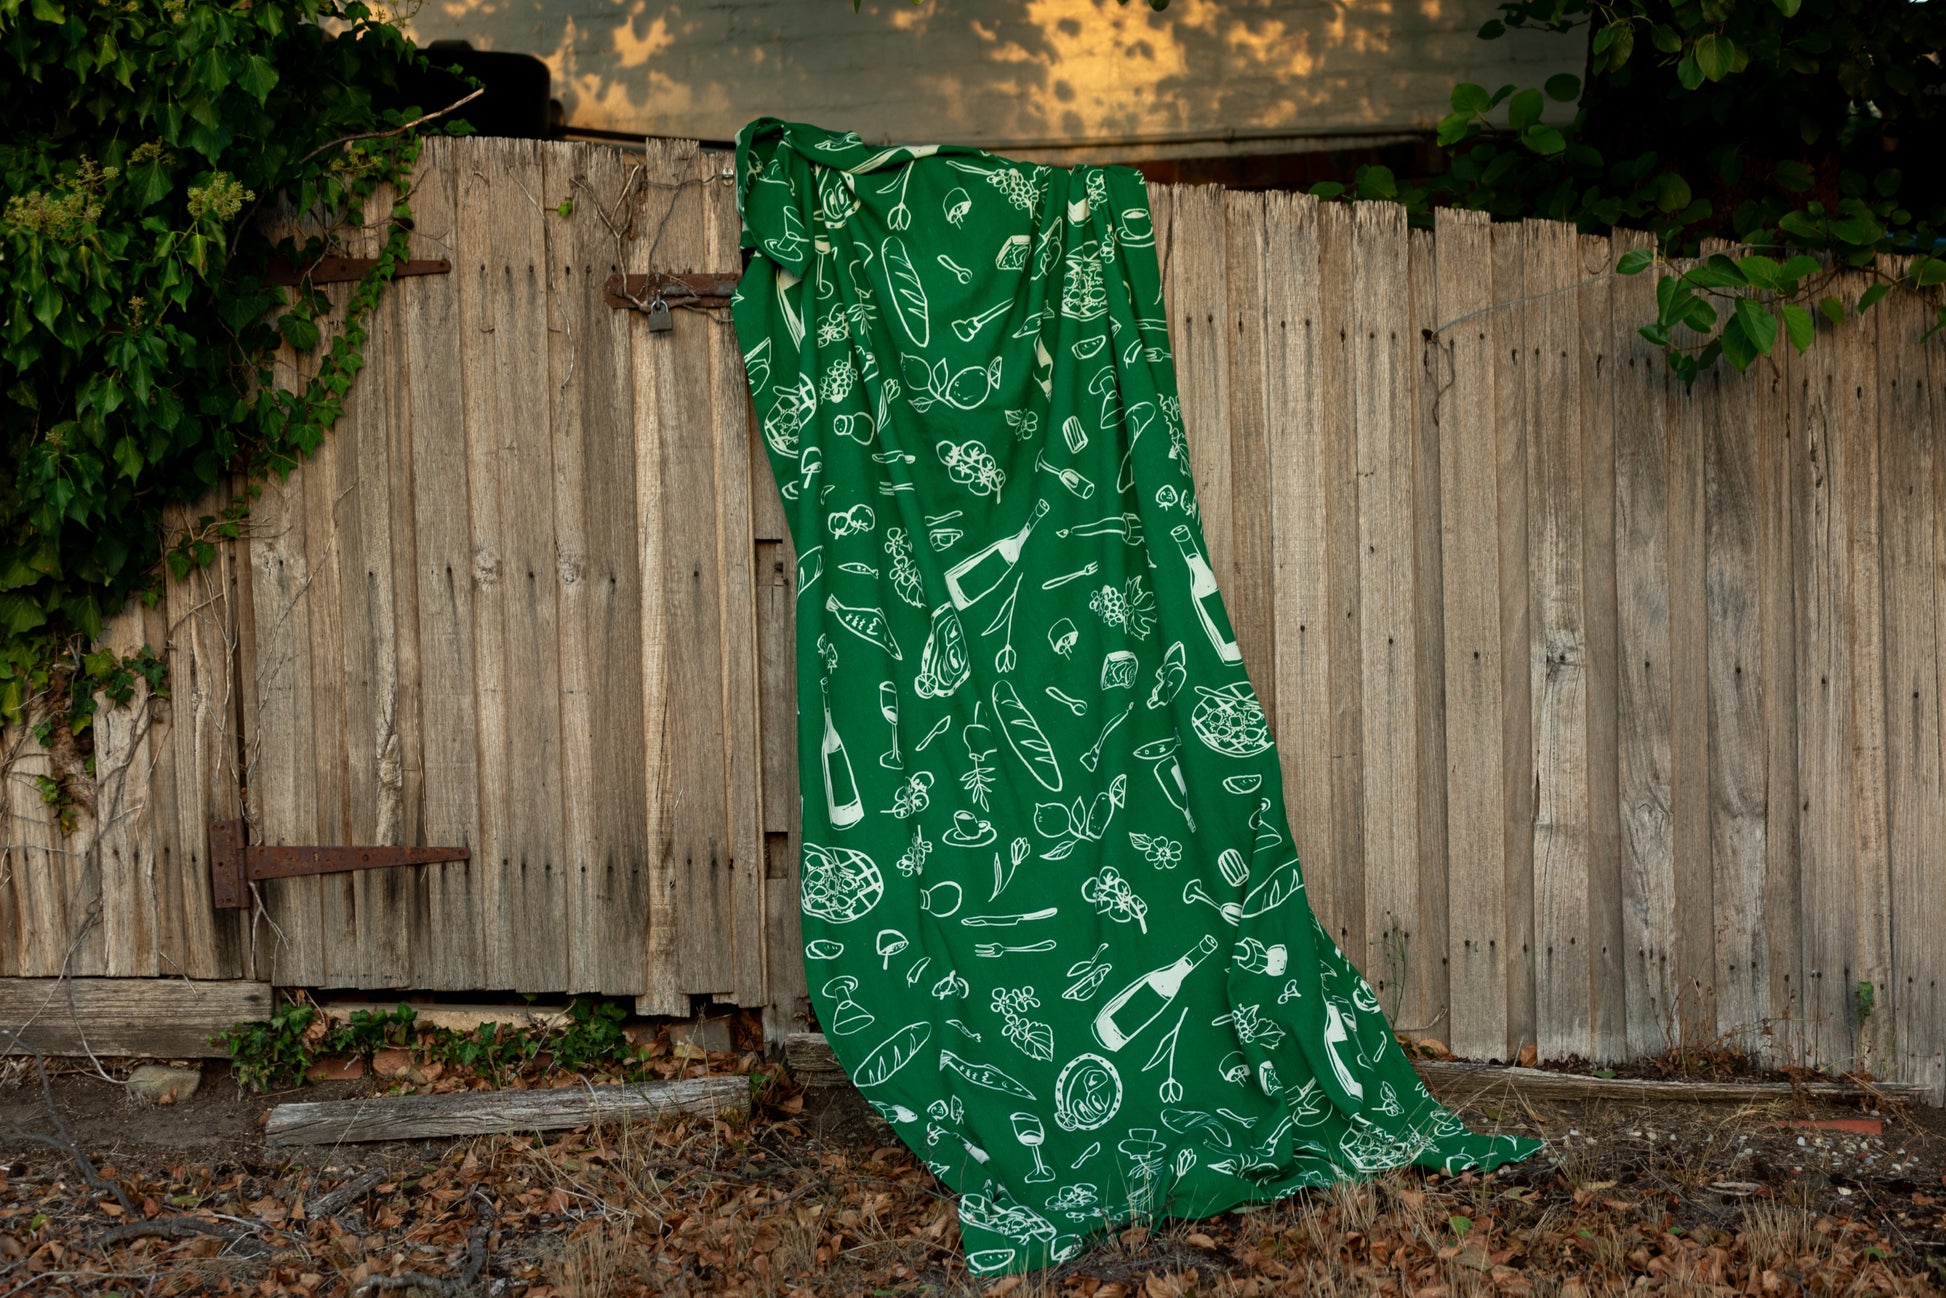 green tablecloth on a fence very romantic view